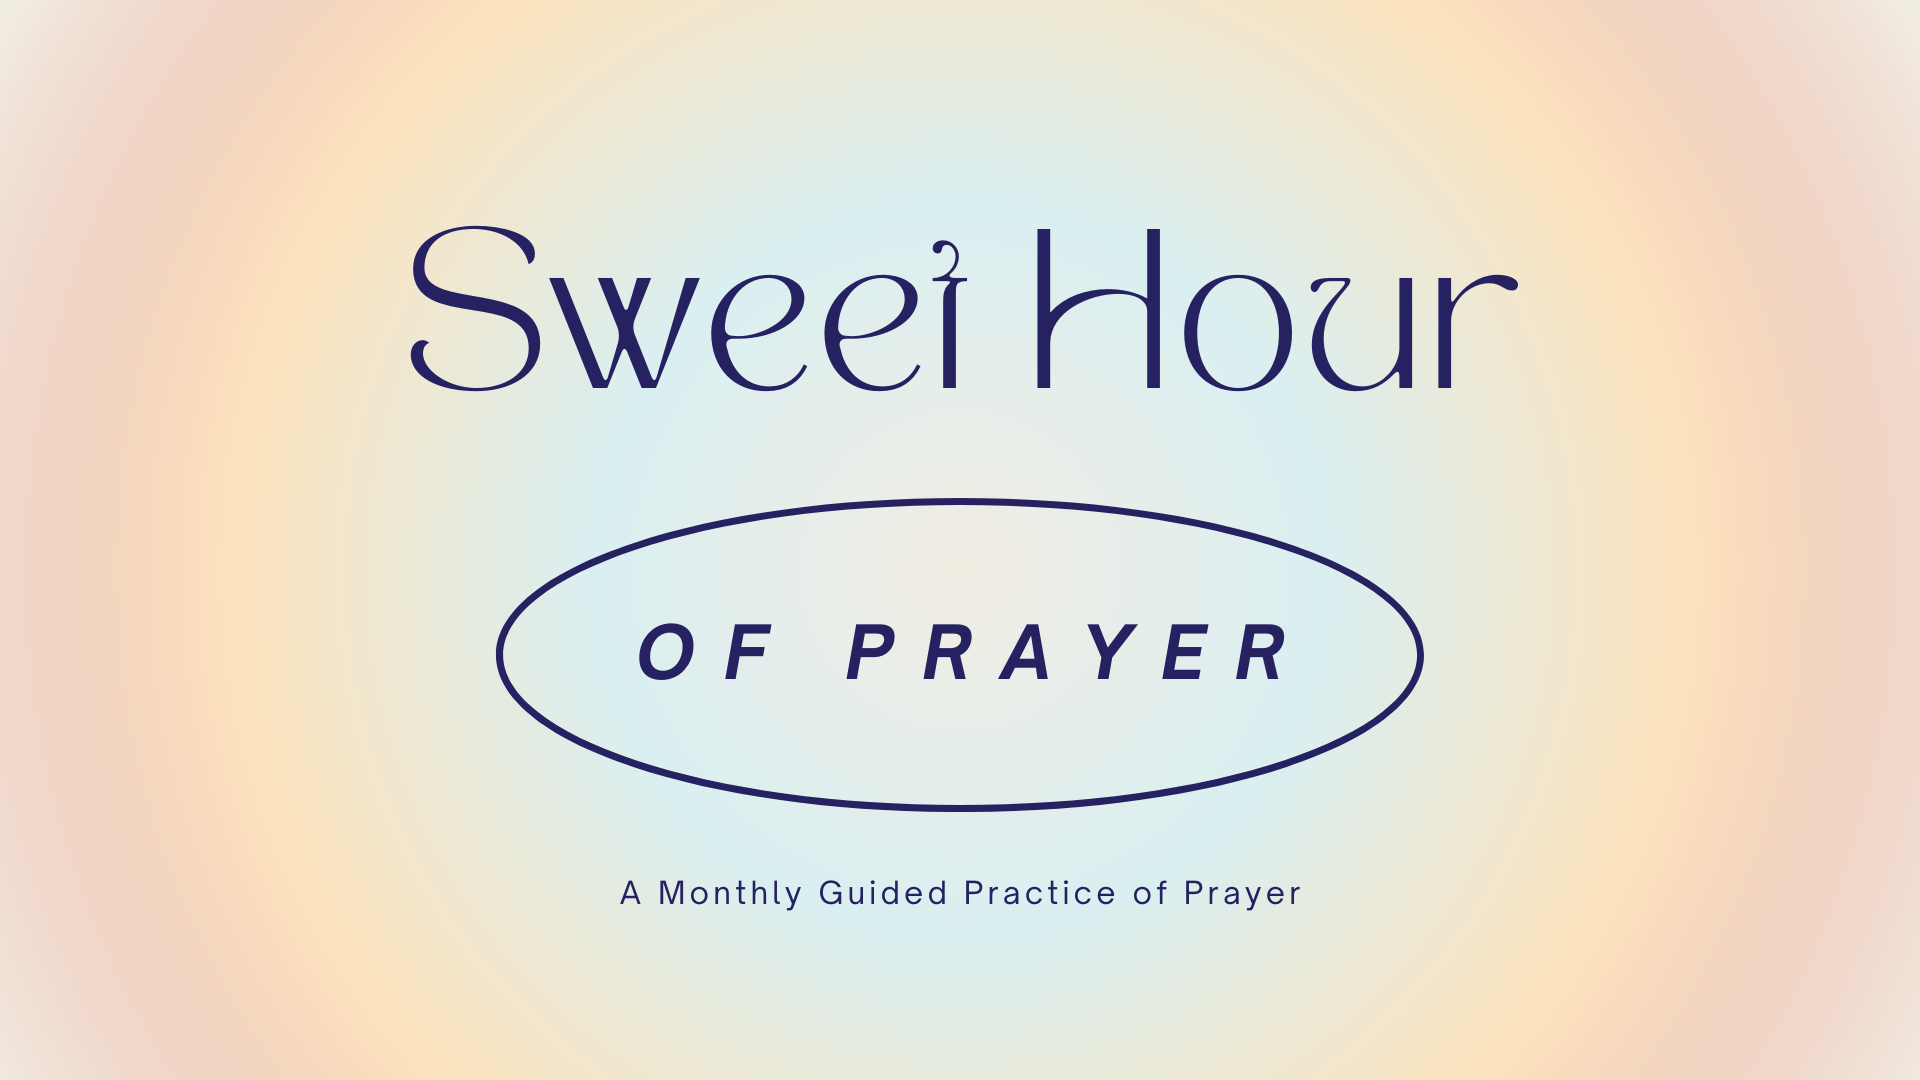 Sweet Hour of Prayer A Monthly Guided Practice of Prayer